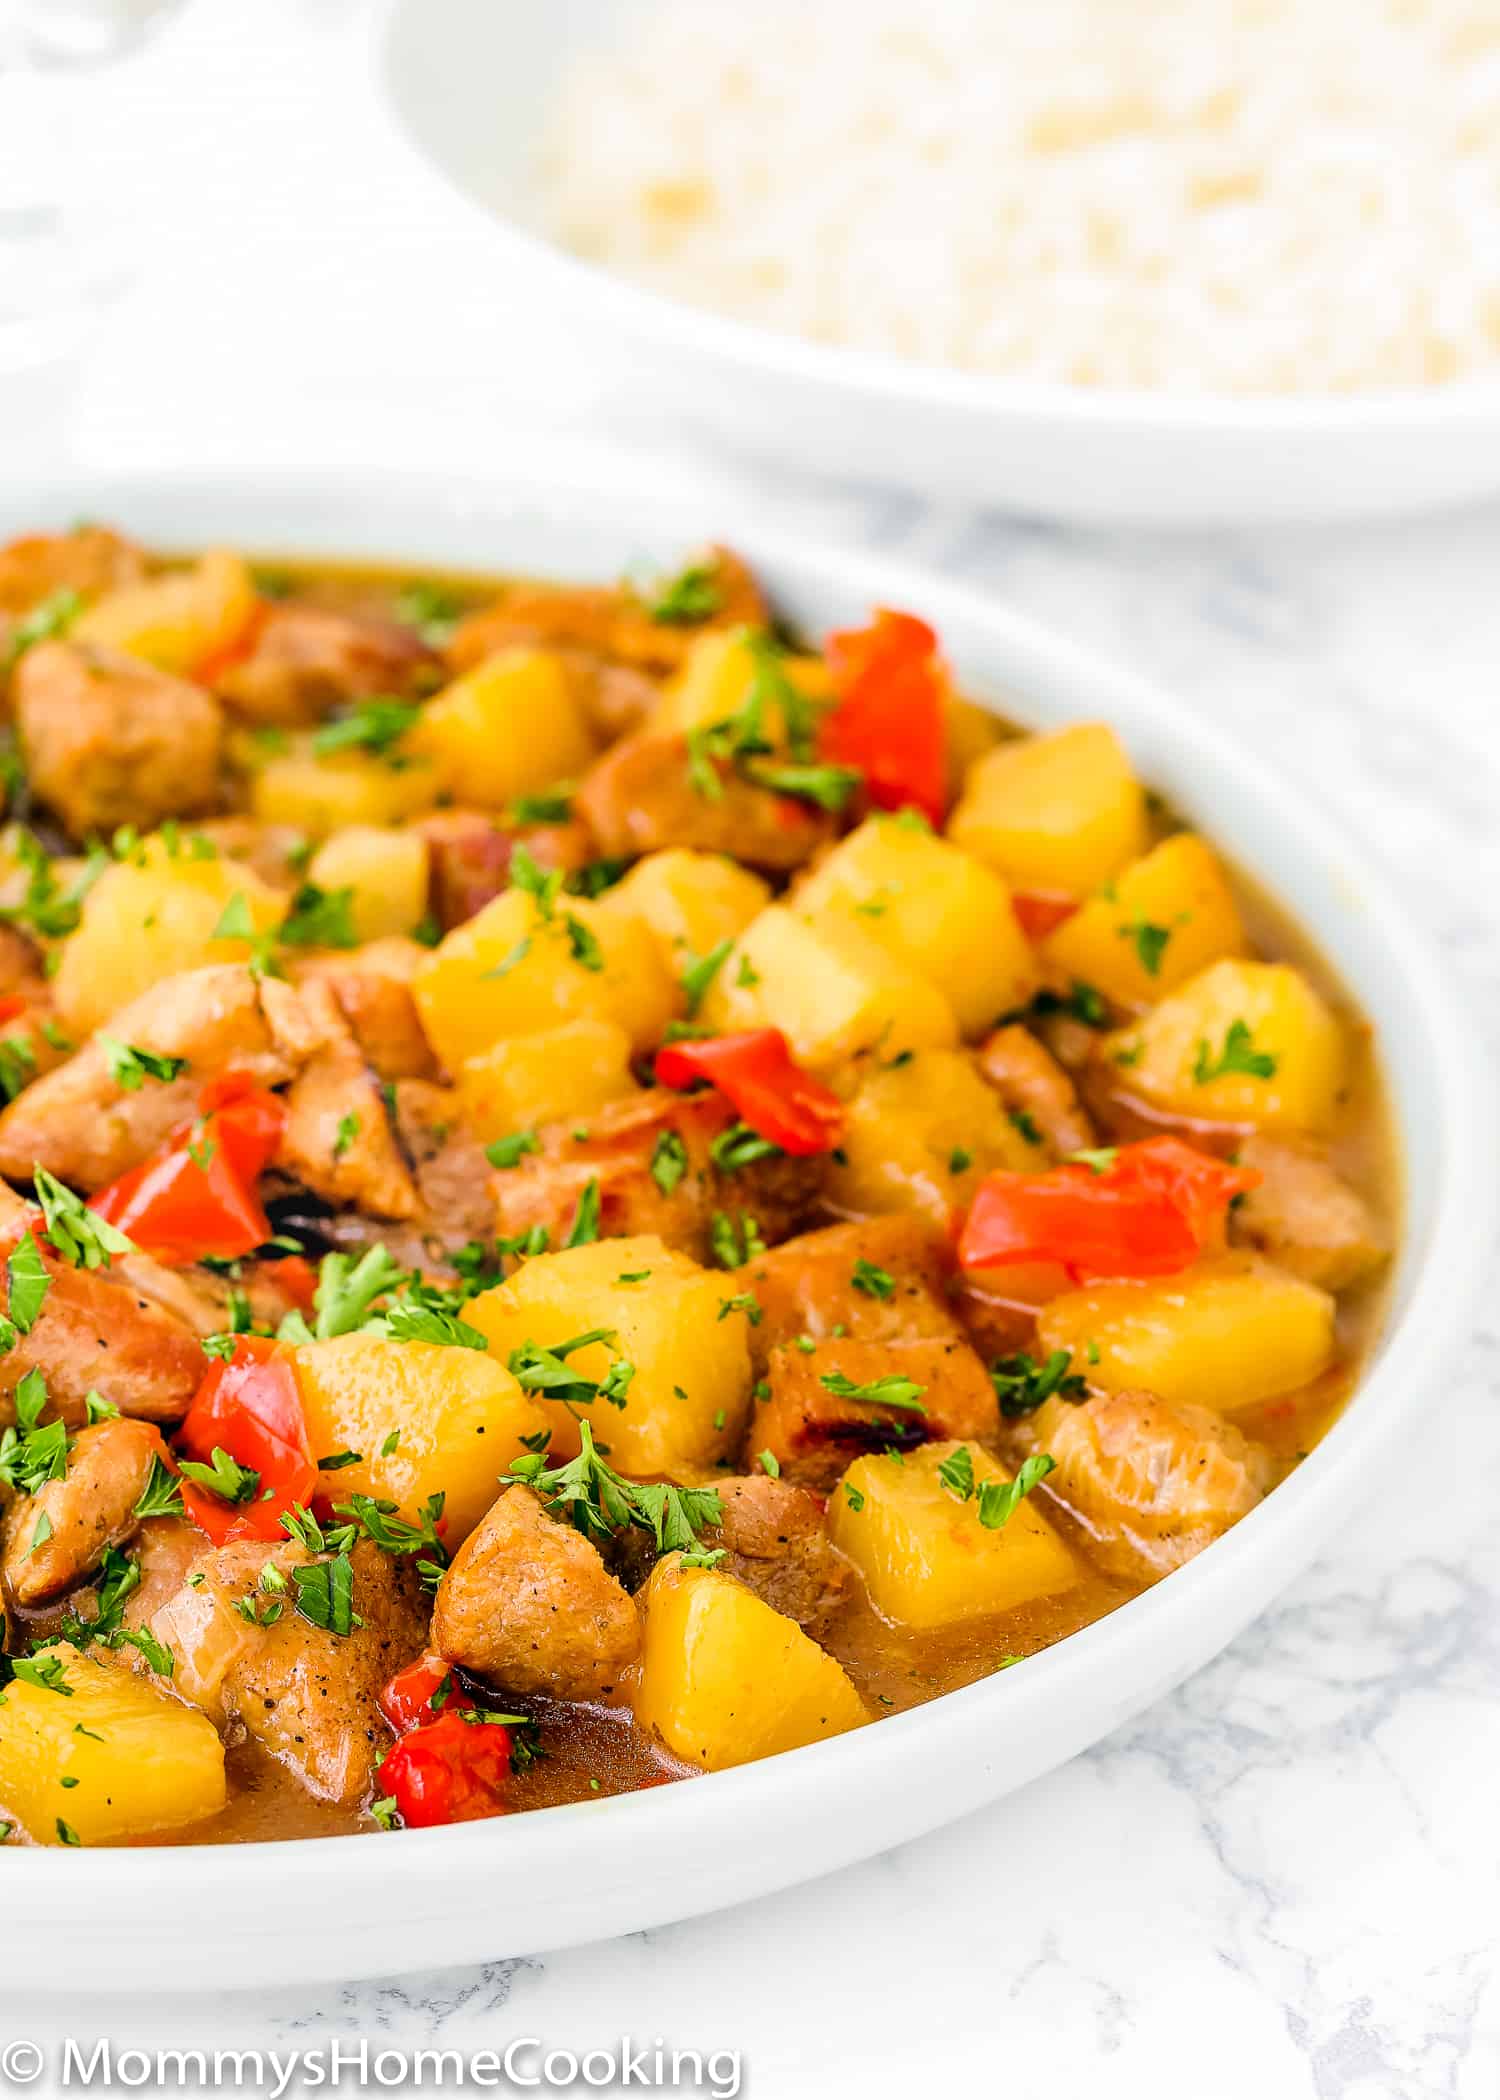 This Instant Pot Hawaiian Pineapple Pork recipe is a quick and easy dish that is perfect for busy weeknights. It's out of this world delicious. Smoky, sweet, salty and tangy. Best of all...this dish is ready in under 30 minutes! https://mommyshomecooking.com